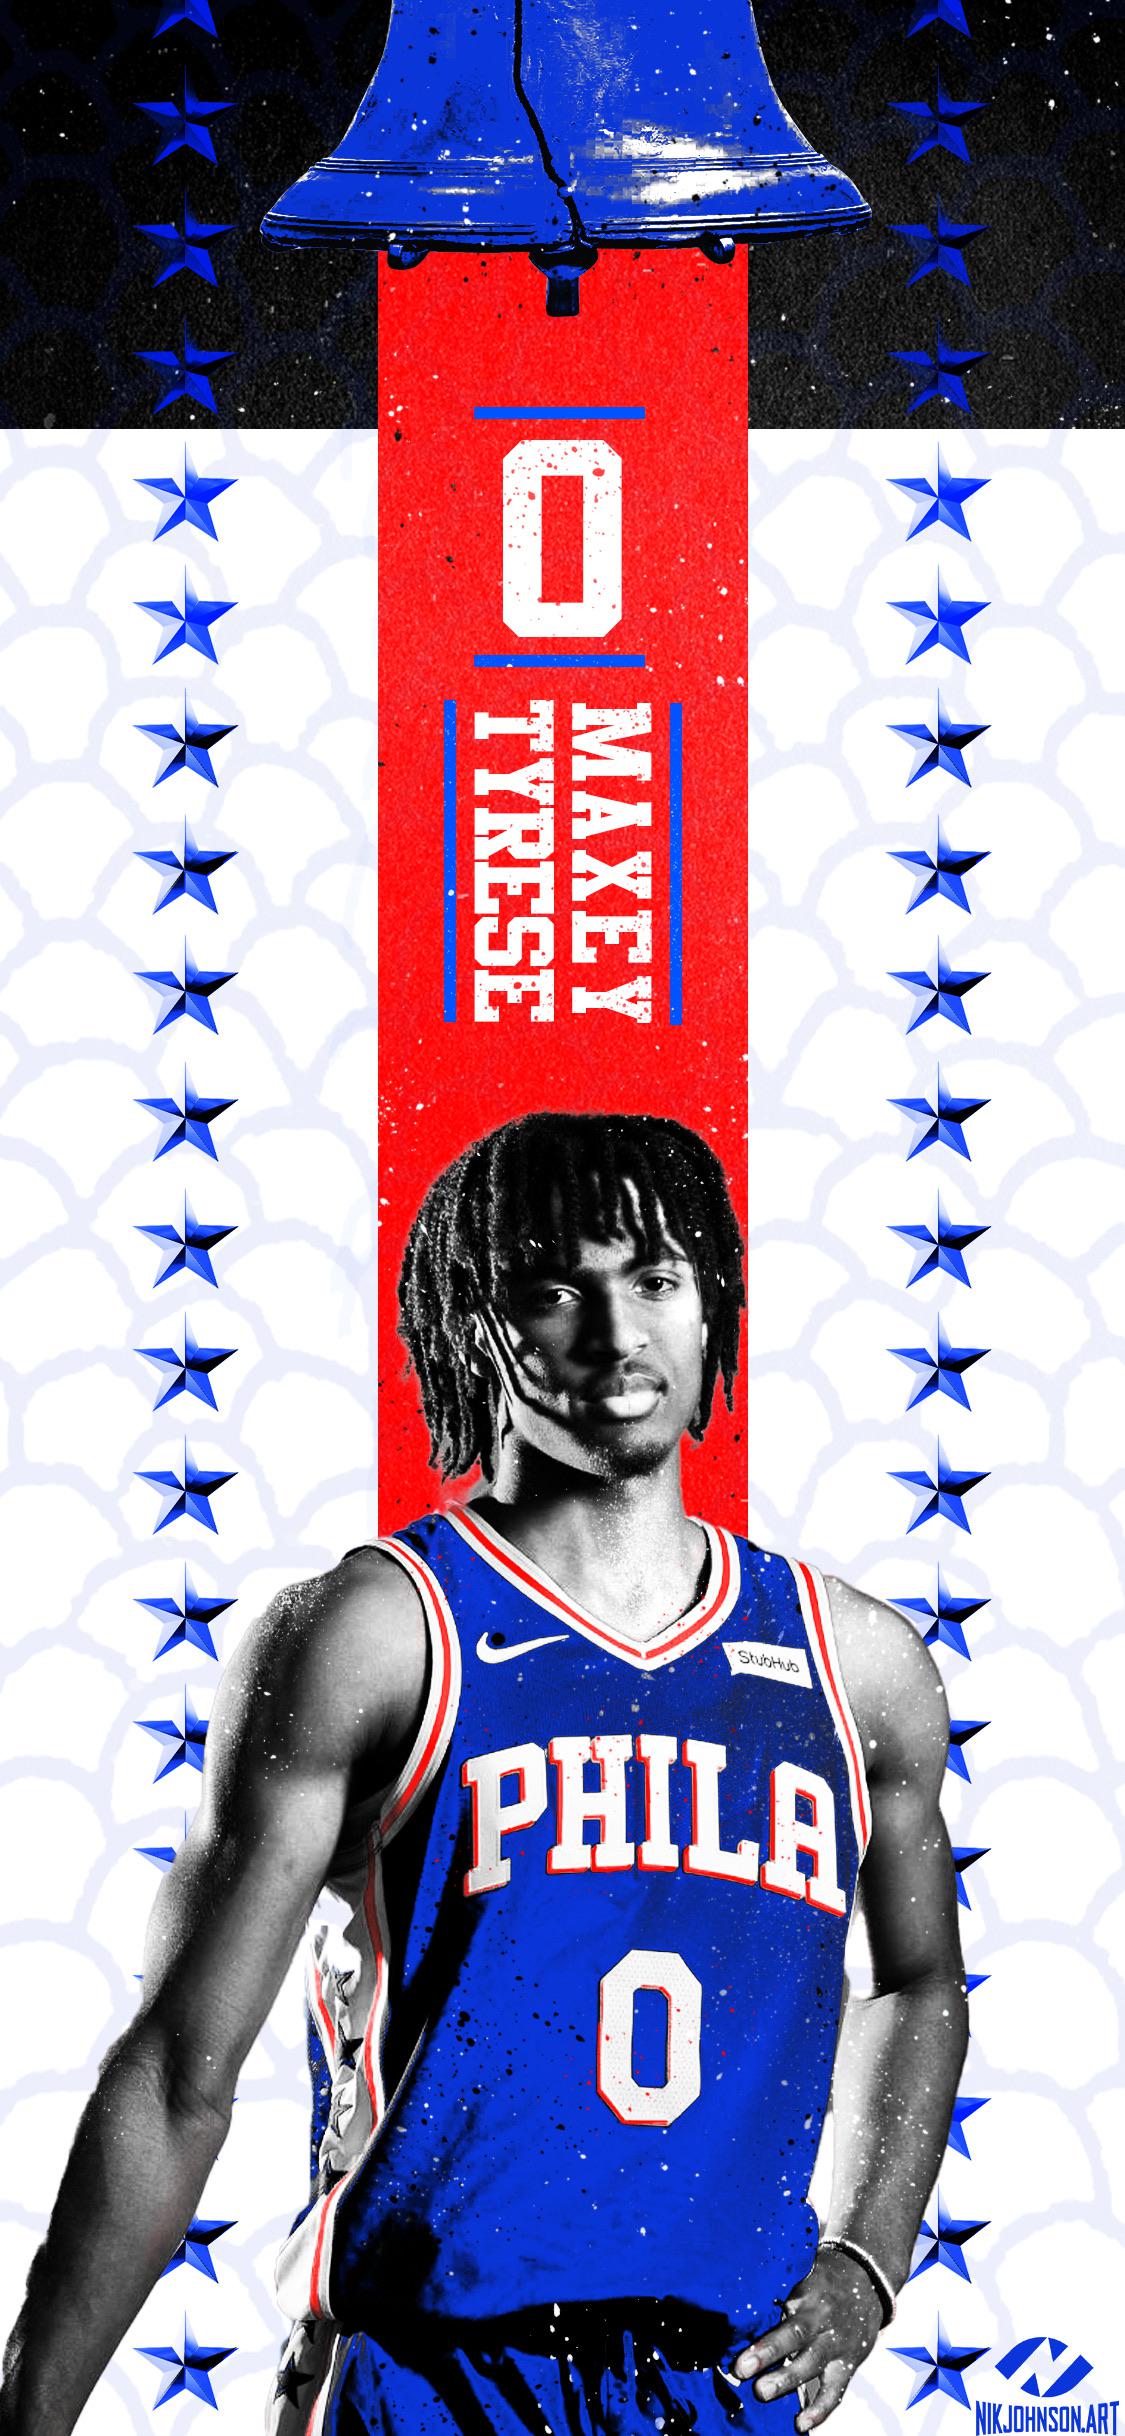 Tyrese maxey has been projected to be drafted number 5 to the Timberwolves  according to cbs  Kentucky Kentucky wildcats Tank man